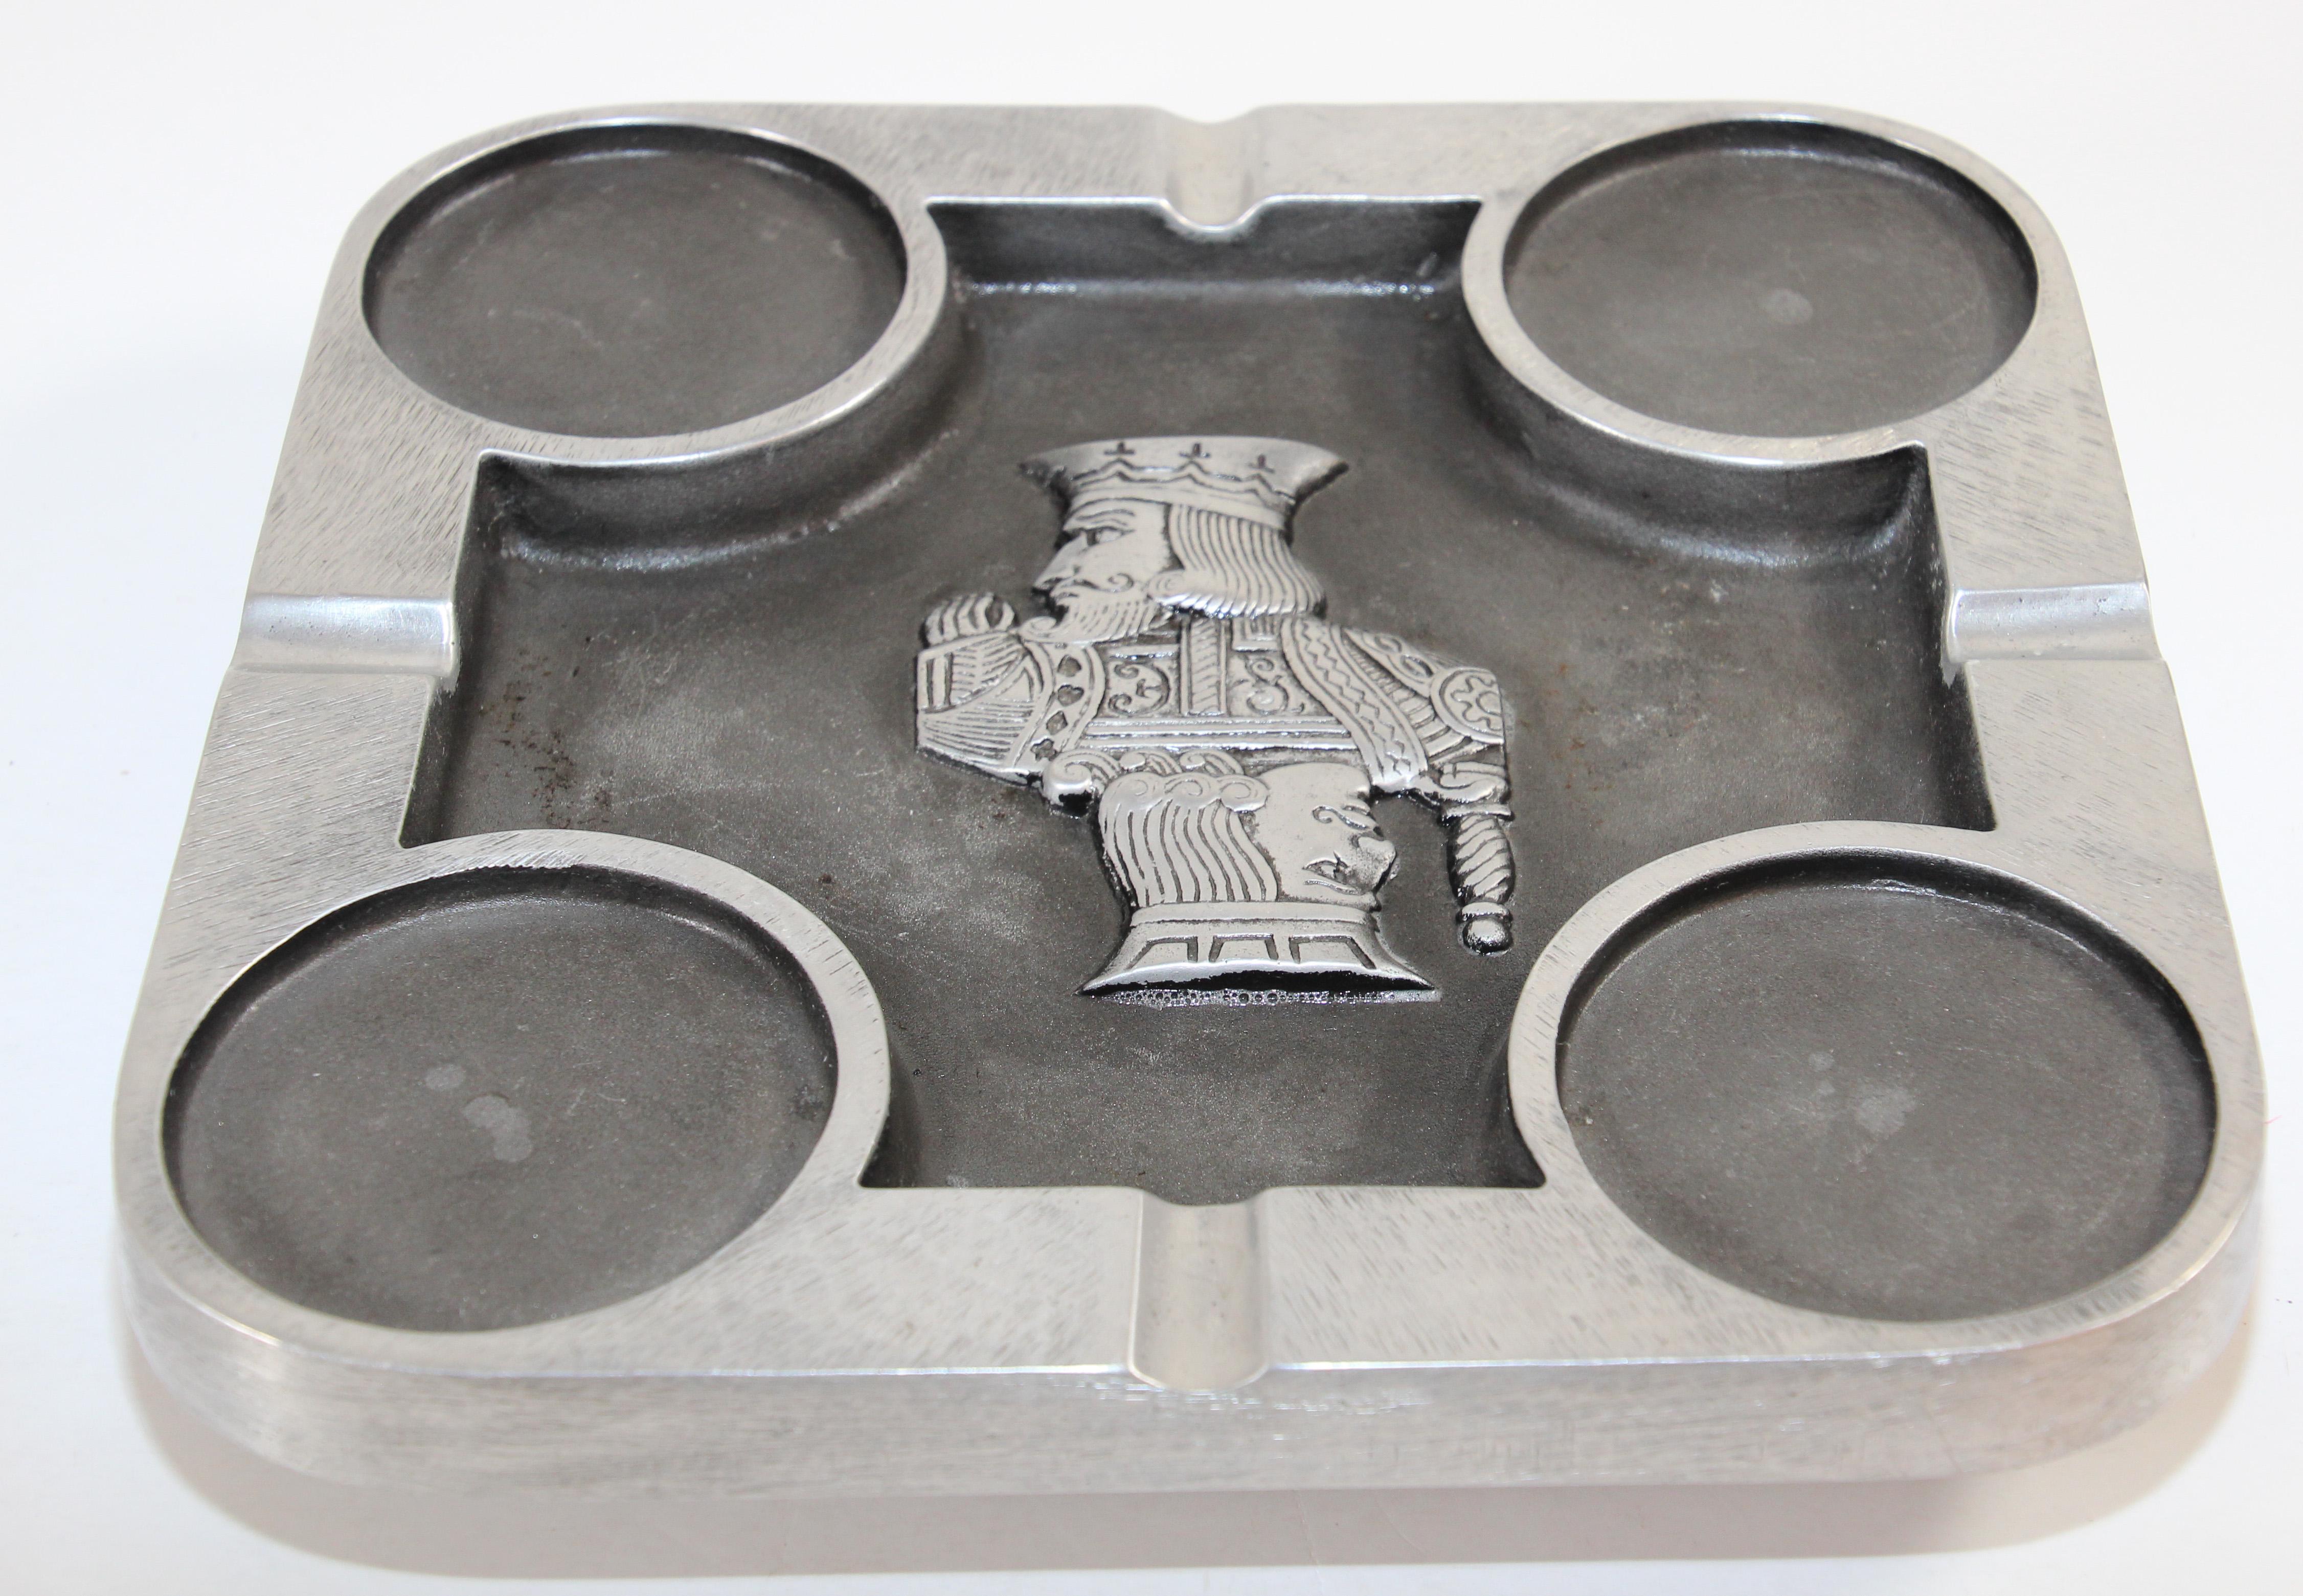 Handcrafted Bruce Fox cast aluminum large collectible square cigar ashtray
Rare vintage cast aluminum signed 